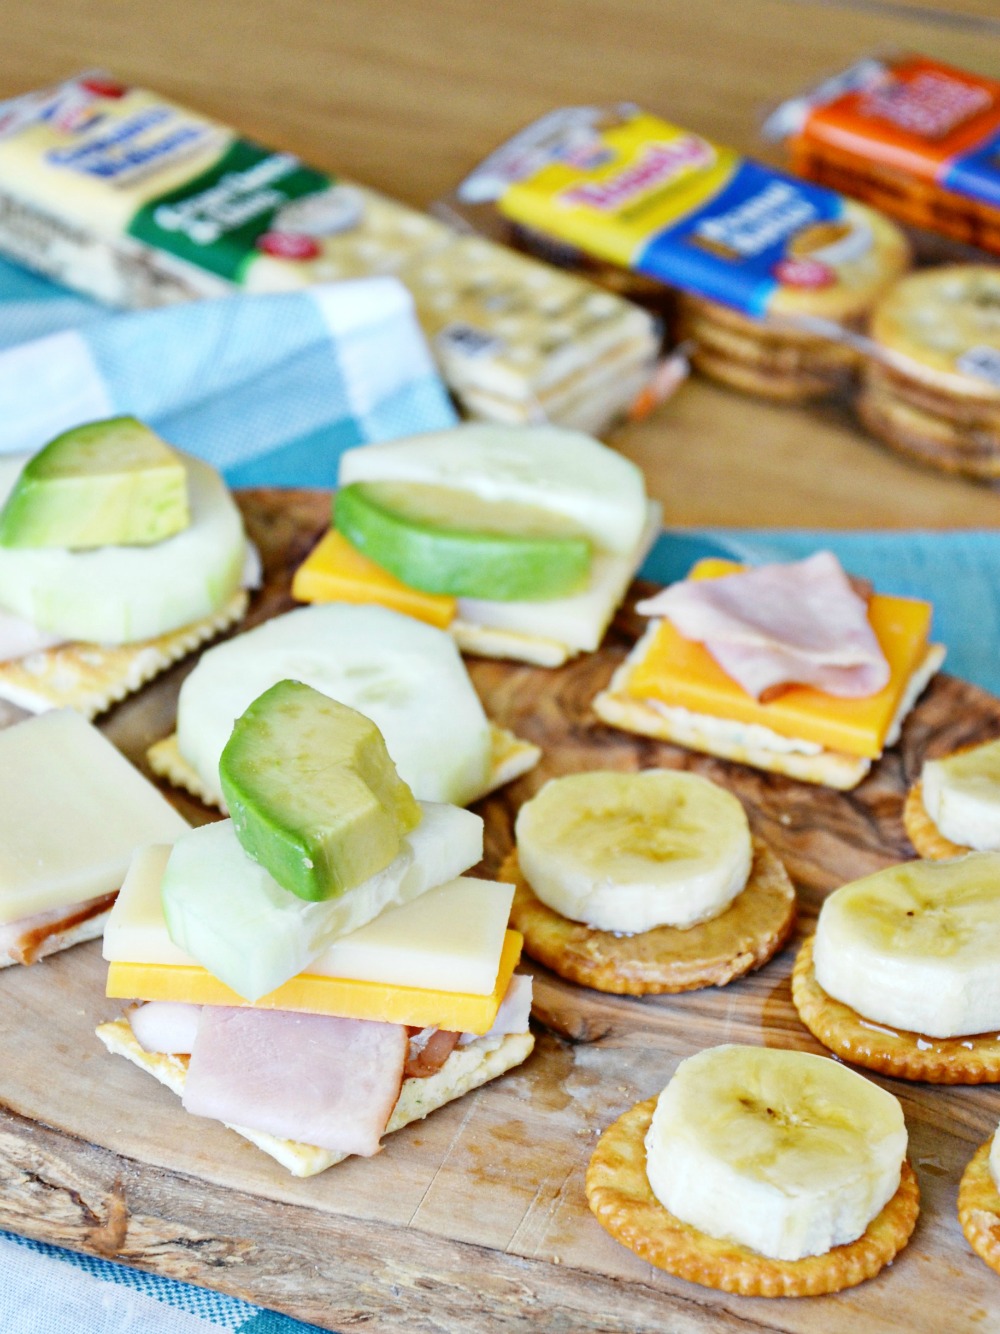 Savory or sweet - get creative with this easy lunch box idea. Stack cracker sandwiches with favorite toppings!